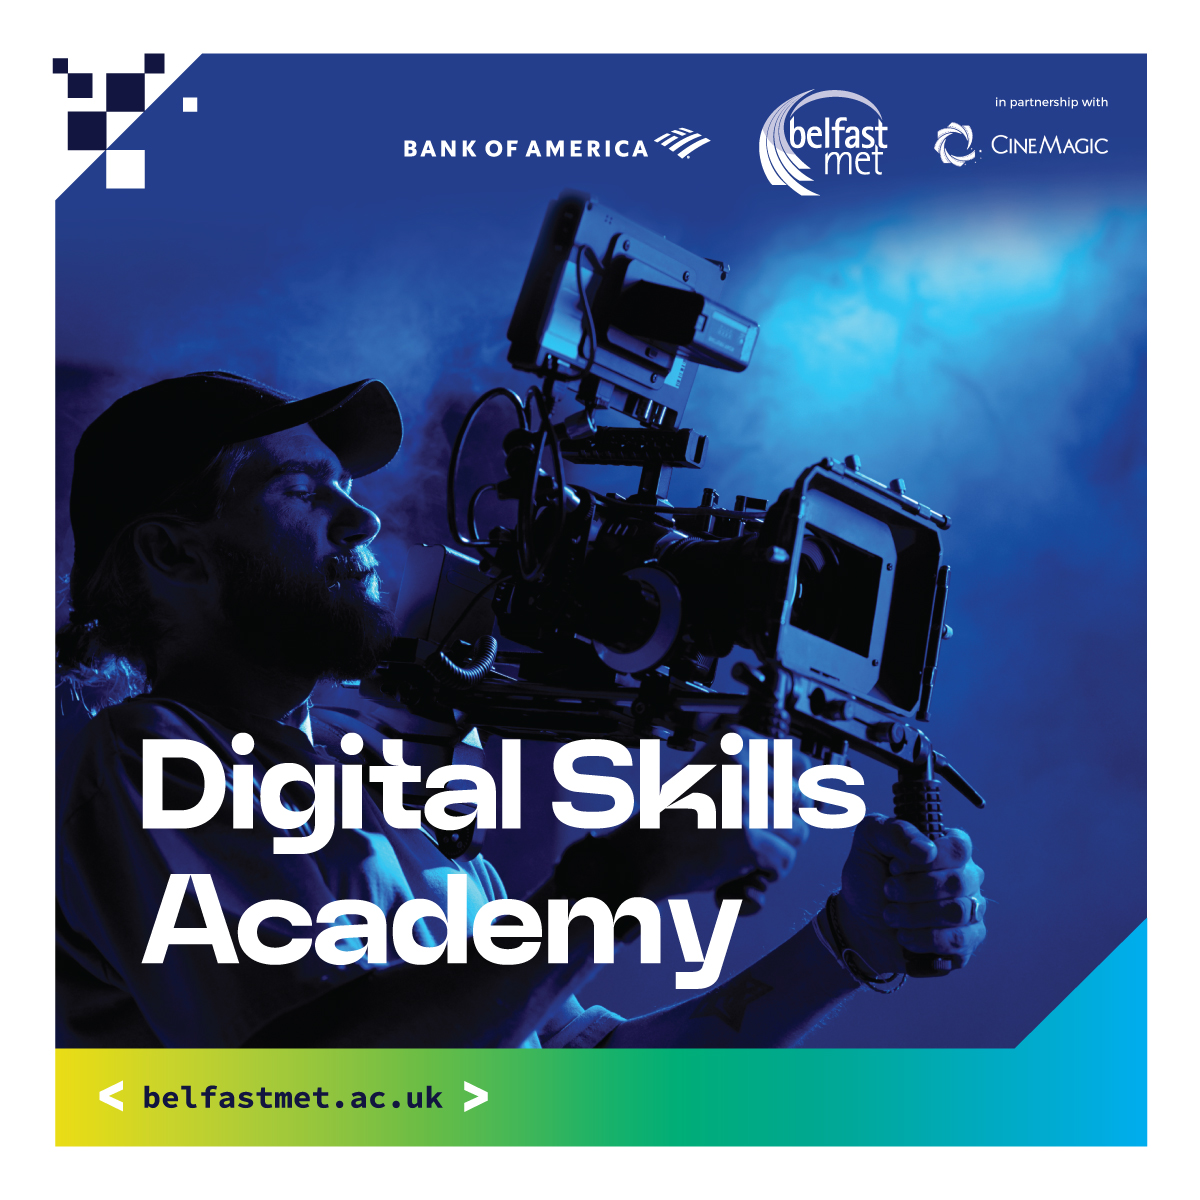 Apply today (deadline: 08/05/2024) for this Digital Skills Academy opportunity with @bfastmet and learn how to:

💡 Generate story ideas
📜Craft scripts
🍿Produce a short film
💪Develop your strengths

#WhatNext #Cinemagic #CreativeCareers #BeInspired #BelfastMet @BankofAmerica